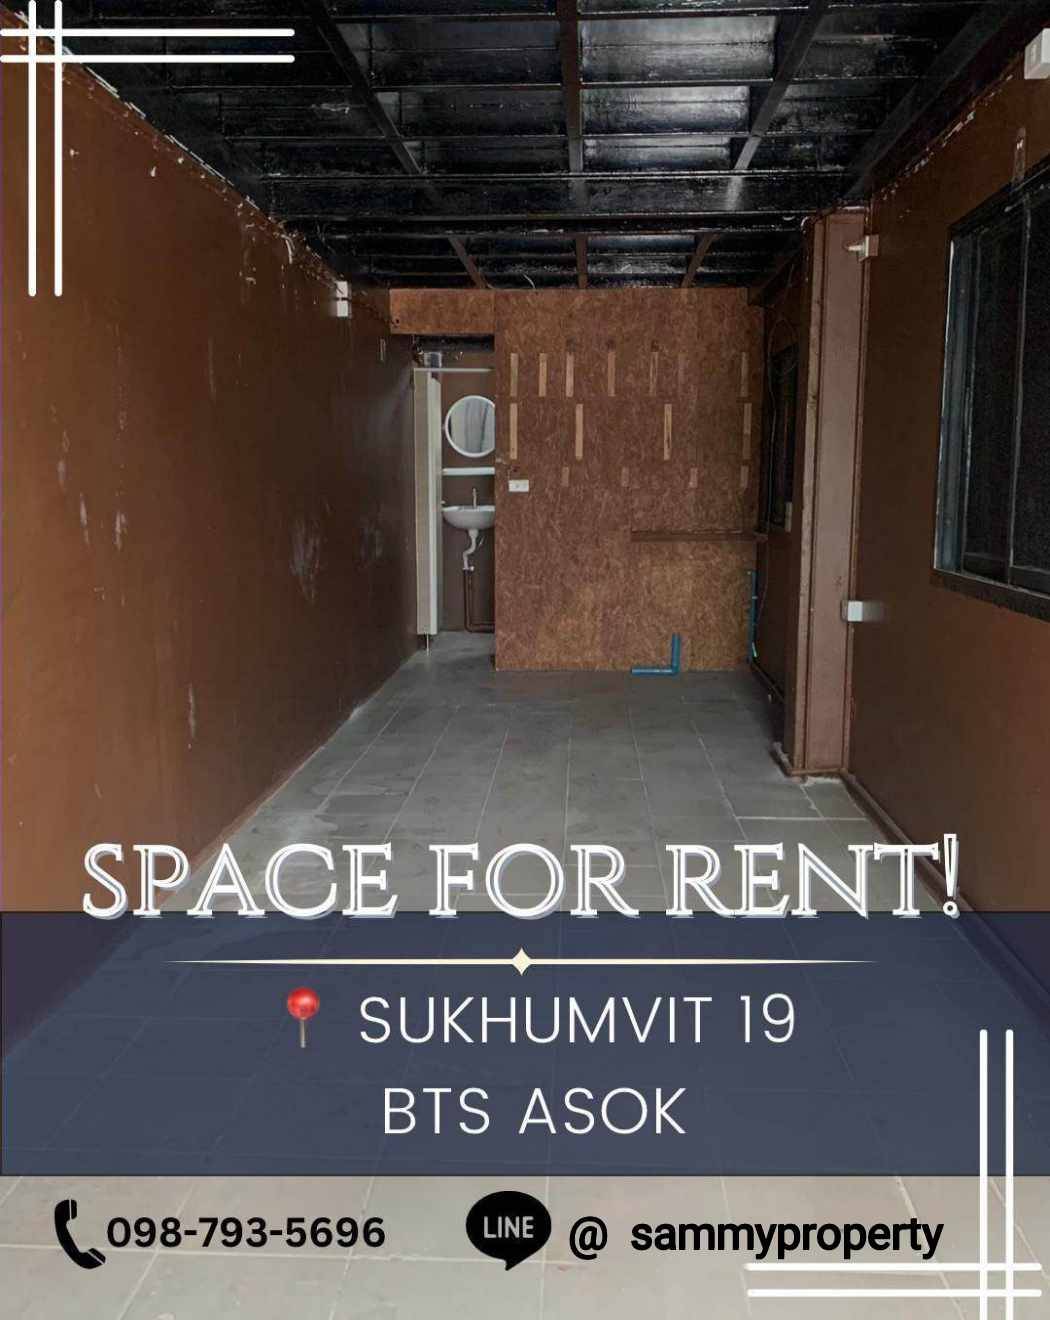 There is space for rent, Sukhumvit Soi 19, urgent, very good location.